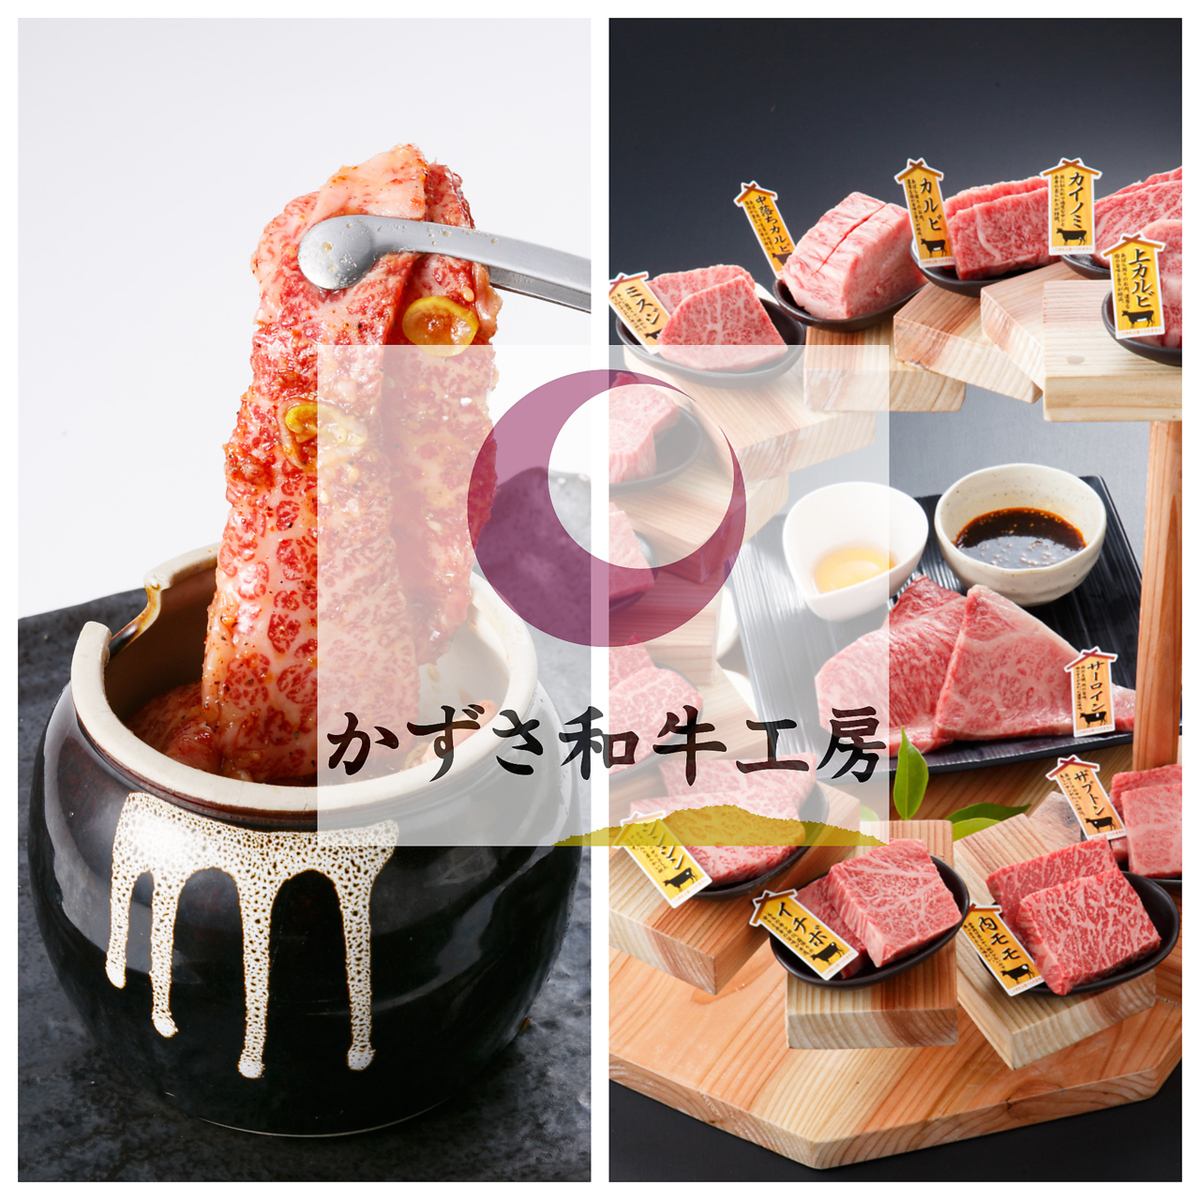 You can taste "Fresh Kazusa Wagyu" unique to a wagyu specialty store.